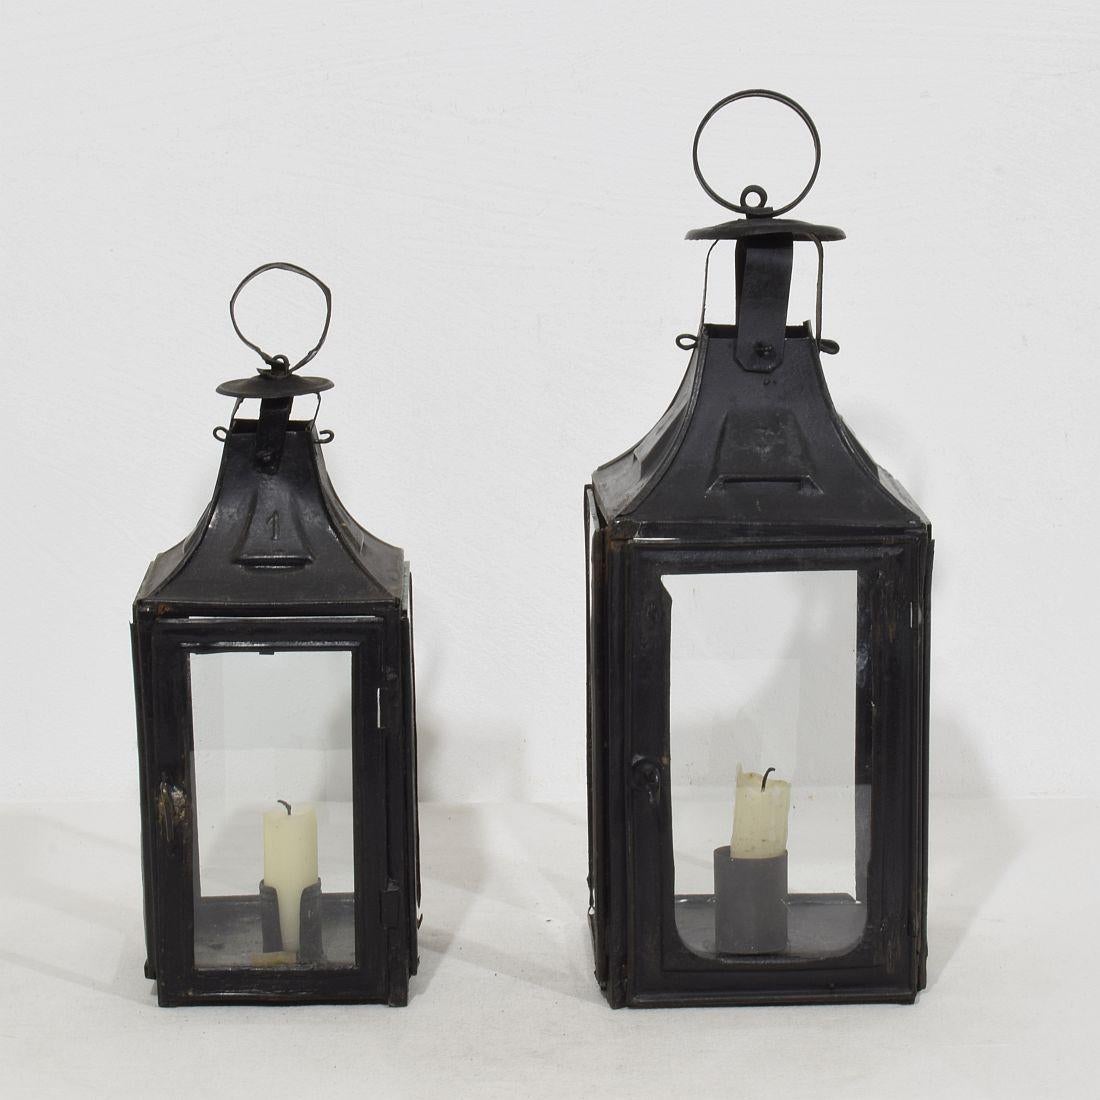 Nice pair of metal lanterns, France, circa 1850-1900.
Weathered and old repairs ( some of the glass once replaced )
Measures: H:26,5-32,5cm  W:10,5-12,5cm
Measurement here below of the largest lantern.